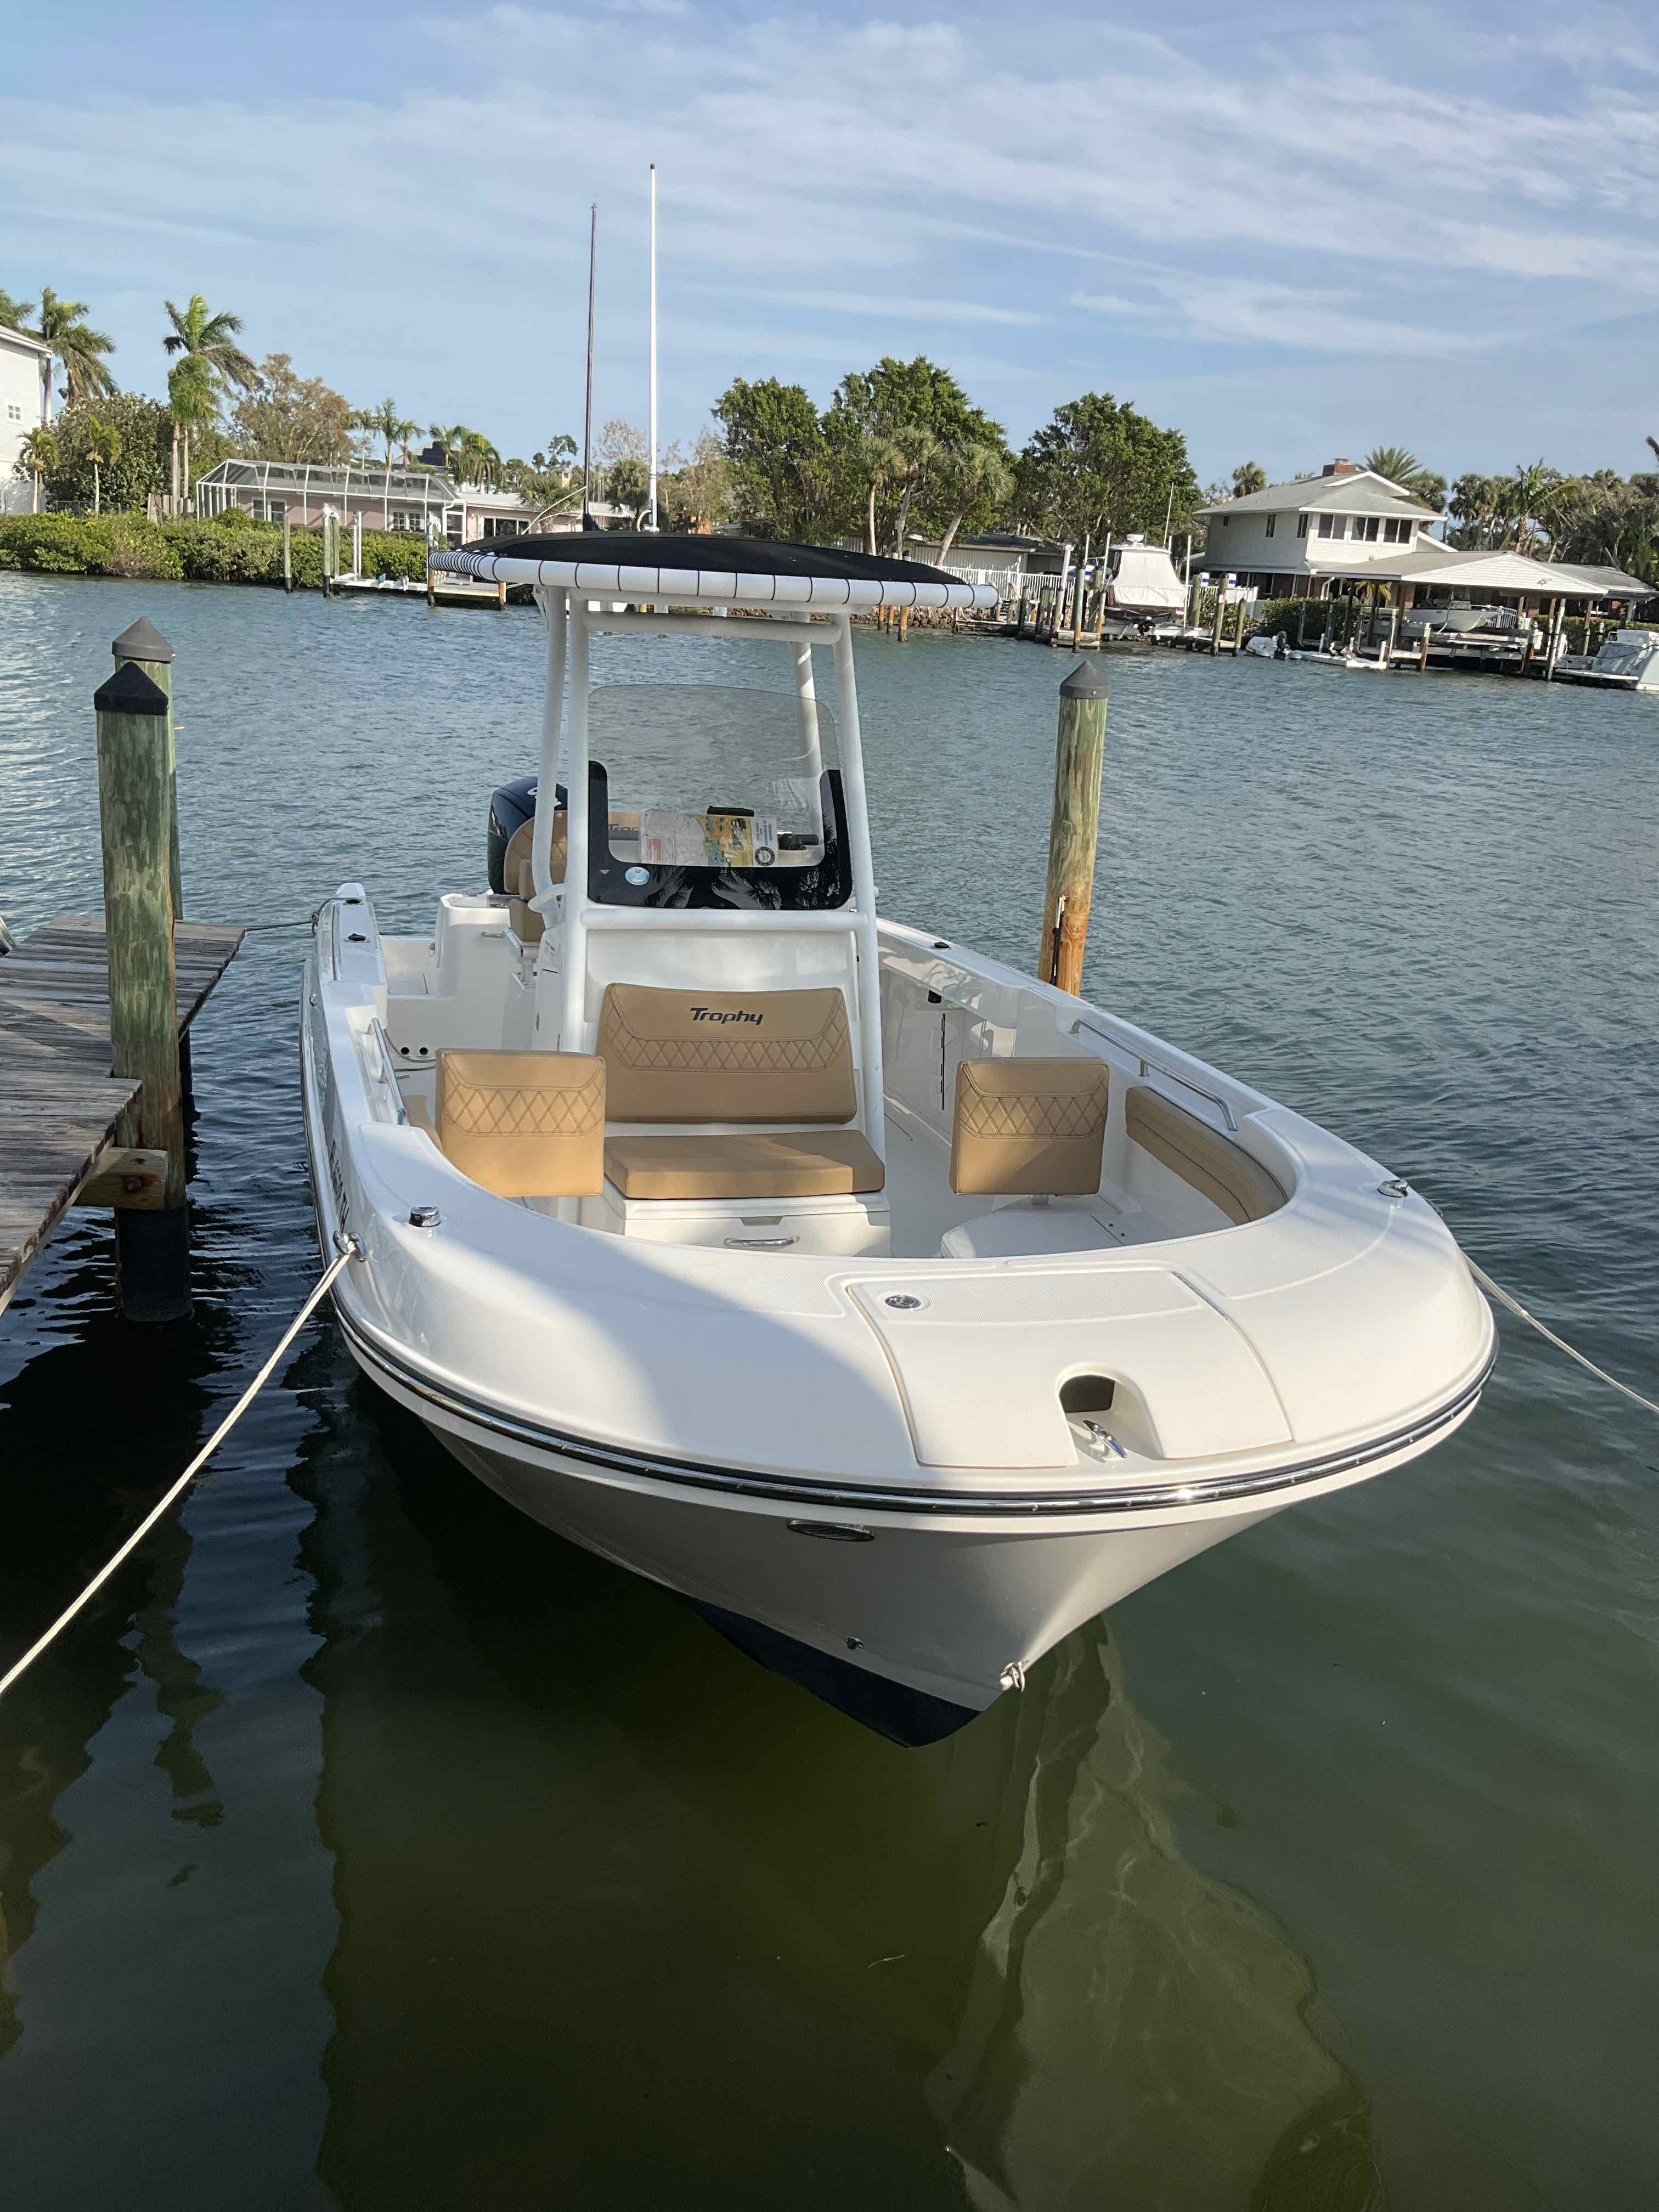 JUAN TIME BABY (22FT Bayliner Trophy Center Console - 200 HP~Near Shore Fishing)